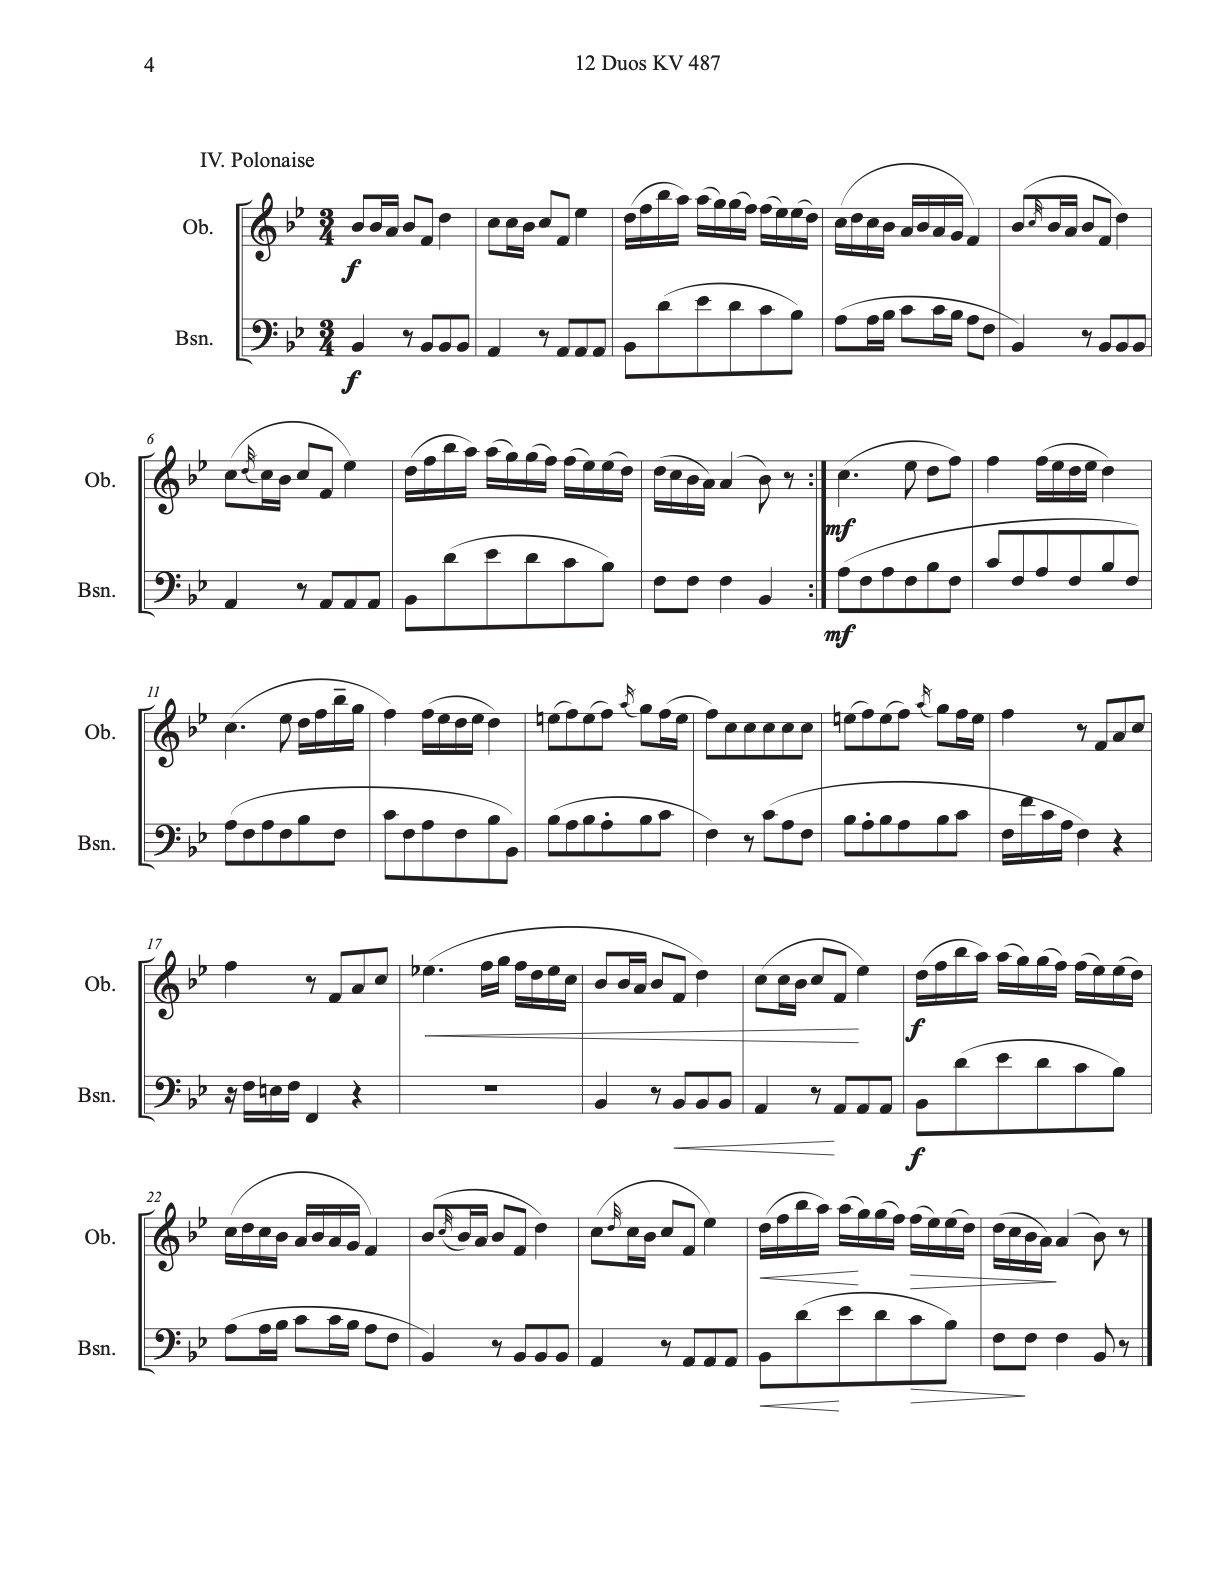 Mozart's 12 Duos KV.487 for Various Instruments (Flute, Clarinet and more) - ChaipruckMekara